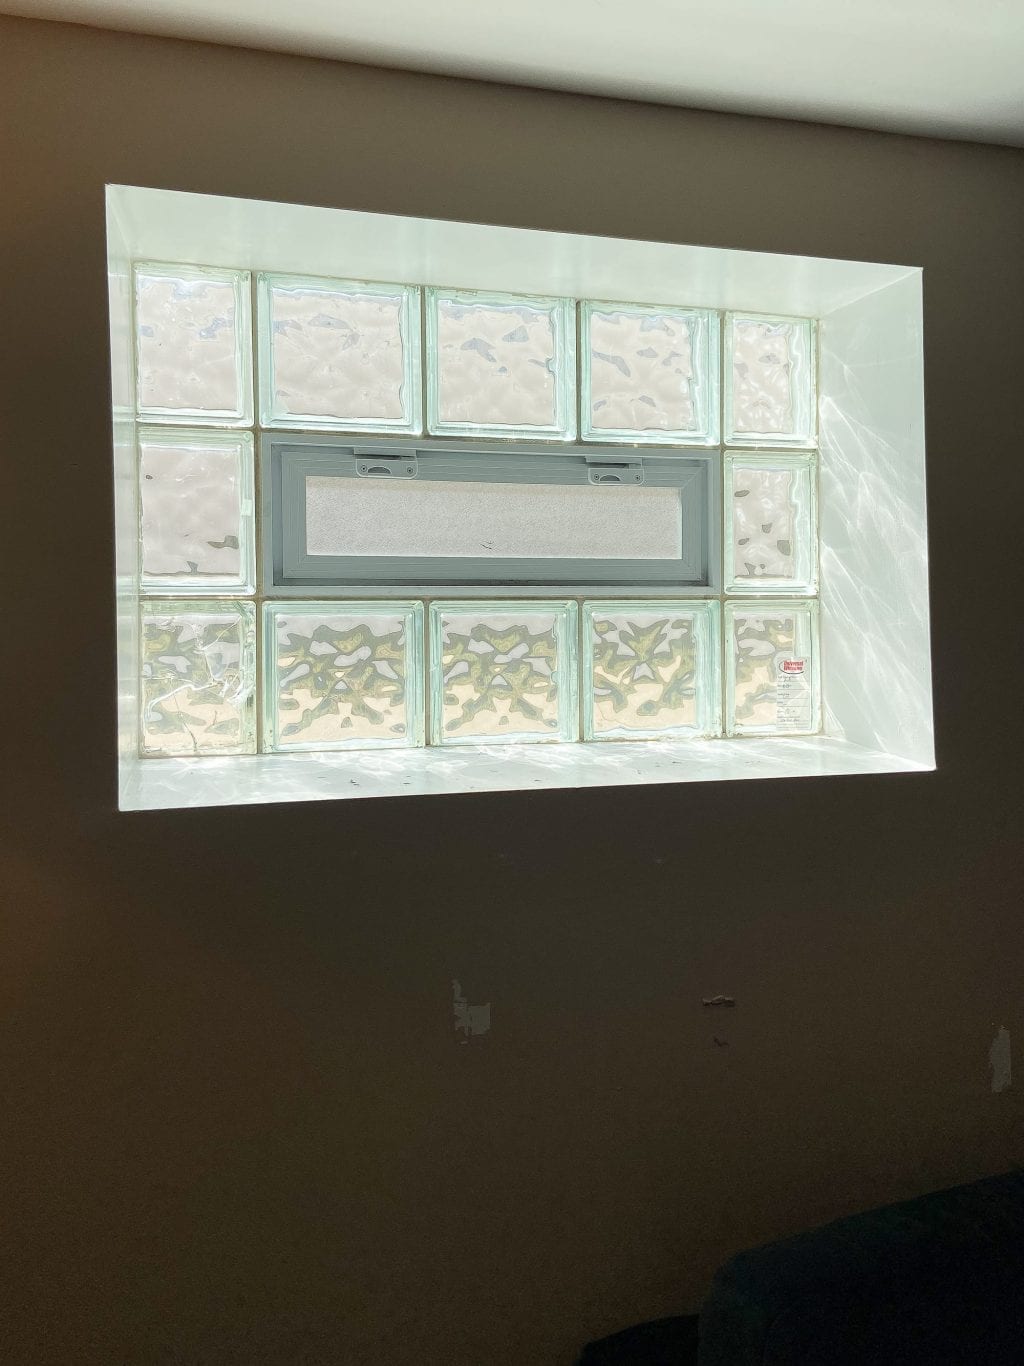 Our old glass block windows